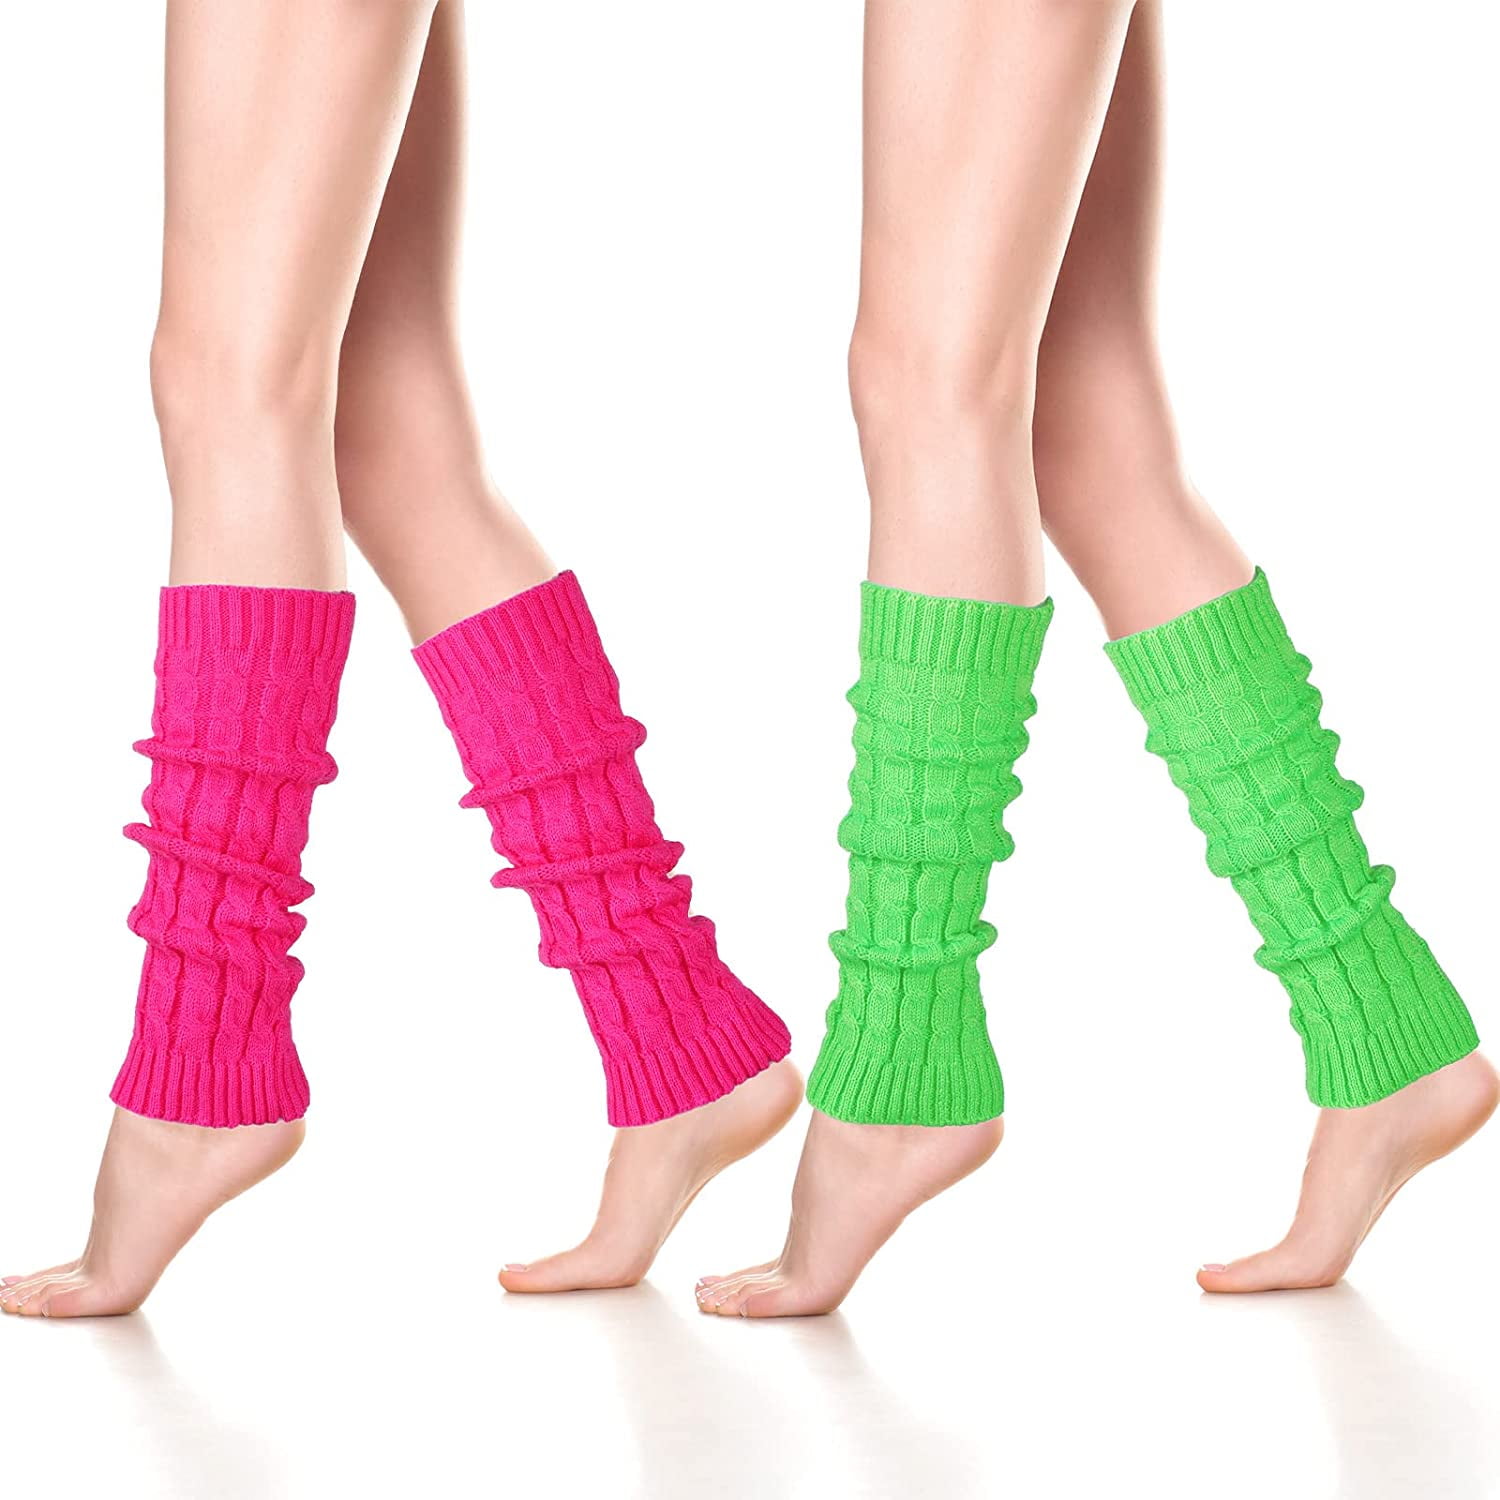 DanceeMangoo 80s Neon Leg Warmers for Women 2 Pairs Thigh High Cable Knit Leg  Warmers Knitted Boot Leg Warmers Hot Pink Green Knee Leg Warmers for Women  Girls Costume 